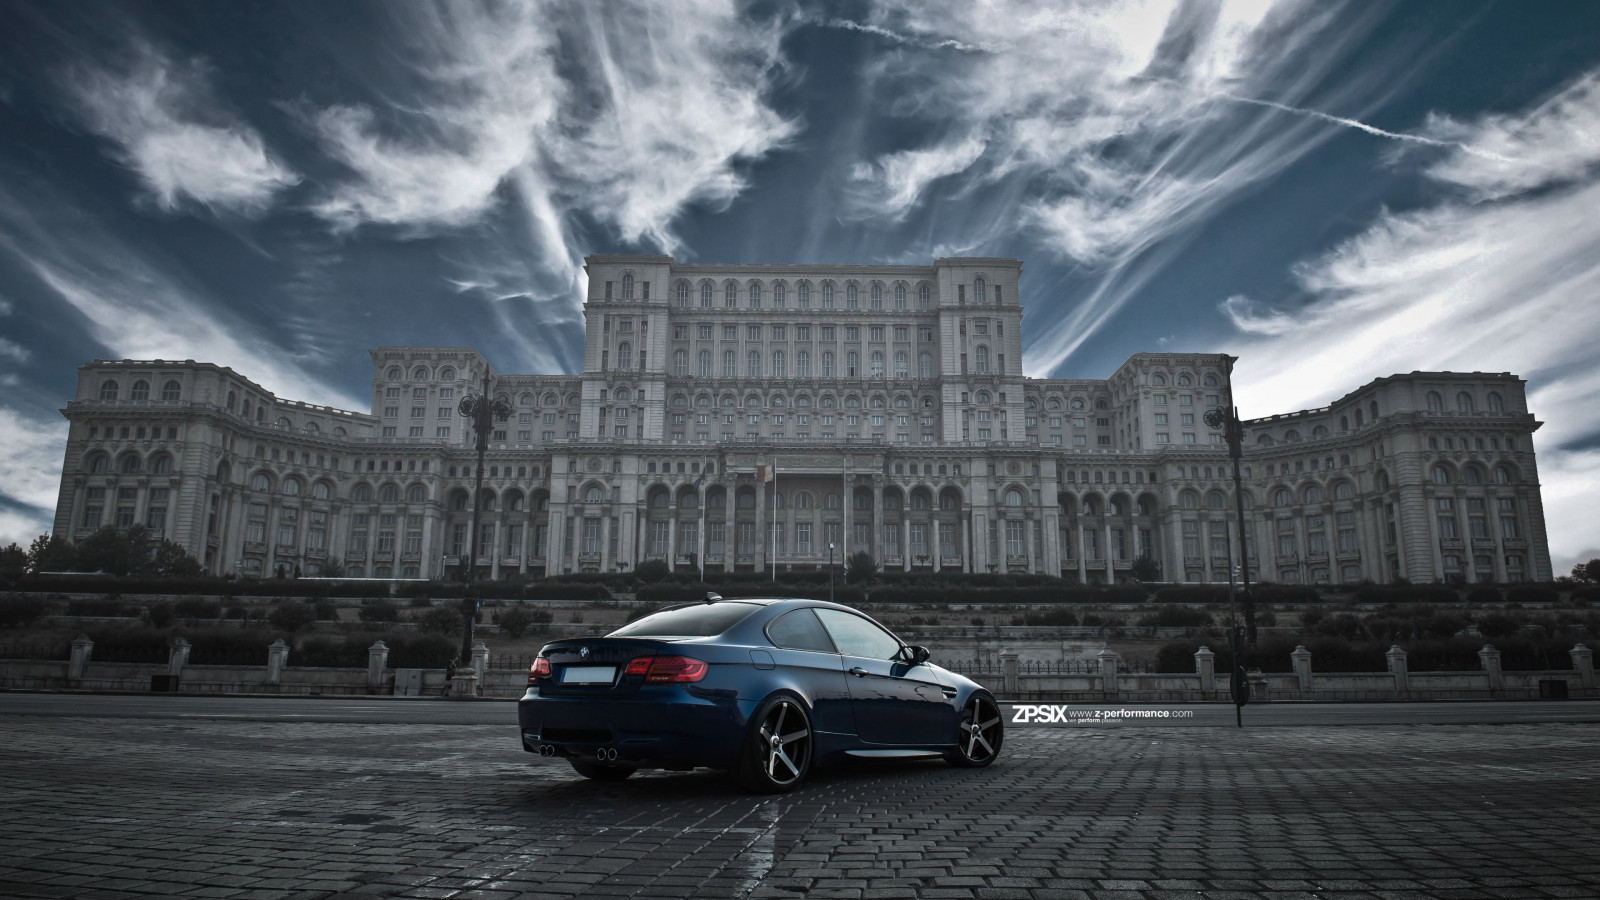 BMW E92 M3 in front of Palace of the Parliament wallpaper 1600x900